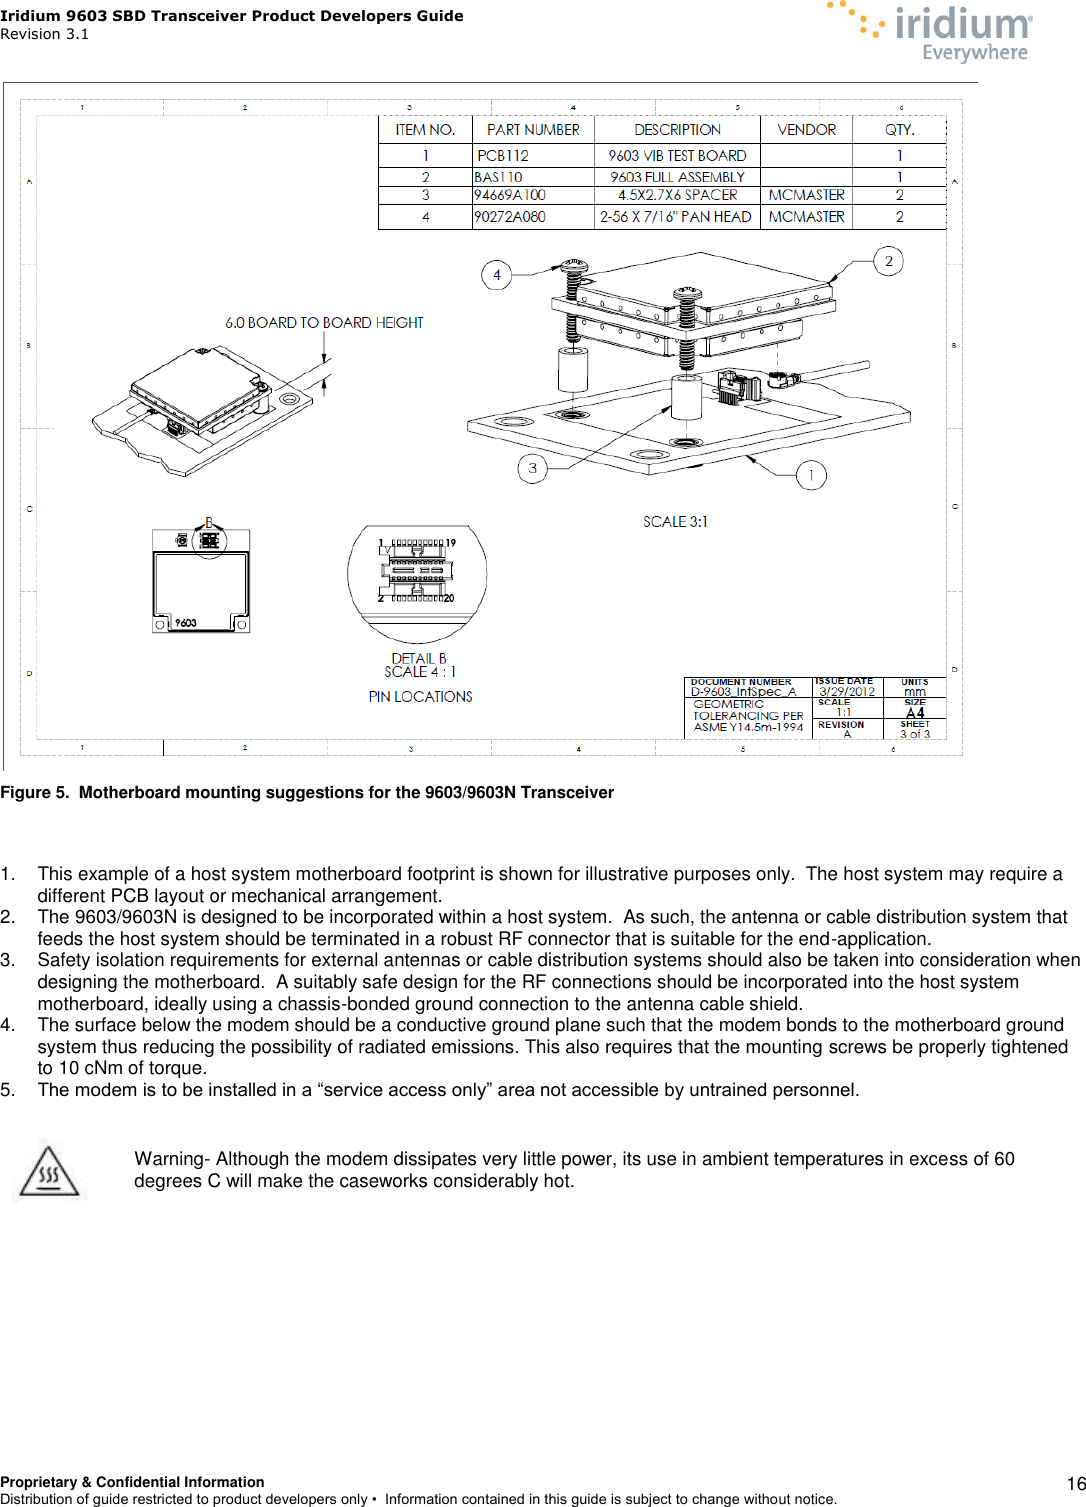 Iridium 9603 SBD Transceiver Product Developers Guide                                                Revision 3.1 Proprietary &amp; Confidential Information Distribution of guide restricted to product developers only •  Information contained in this guide is subject to change without notice.    16  Figure 5.  Motherboard mounting suggestions for the 9603/9603N Transceiver   1.  This example of a host system motherboard footprint is shown for illustrative purposes only.  The host system may require a different PCB layout or mechanical arrangement. 2.  The 9603/9603N is designed to be incorporated within a host system.  As such, the antenna or cable distribution system that feeds the host system should be terminated in a robust RF connector that is suitable for the end-application. 3.  Safety isolation requirements for external antennas or cable distribution systems should also be taken into consideration when designing the motherboard.  A suitably safe design for the RF connections should be incorporated into the host system motherboard, ideally using a chassis-bonded ground connection to the antenna cable shield. 4.  The surface below the modem should be a conductive ground plane such that the modem bonds to the motherboard ground system thus reducing the possibility of radiated emissions. This also requires that the mounting screws be properly tightened to 10 cNm of torque. 5. The modem is to be installed in a “service access only” area not accessible by untrained personnel.        Warning- Although the modem dissipates very little power, its use in ambient temperatures in excess of 60 degrees C will make the caseworks considerably hot.    